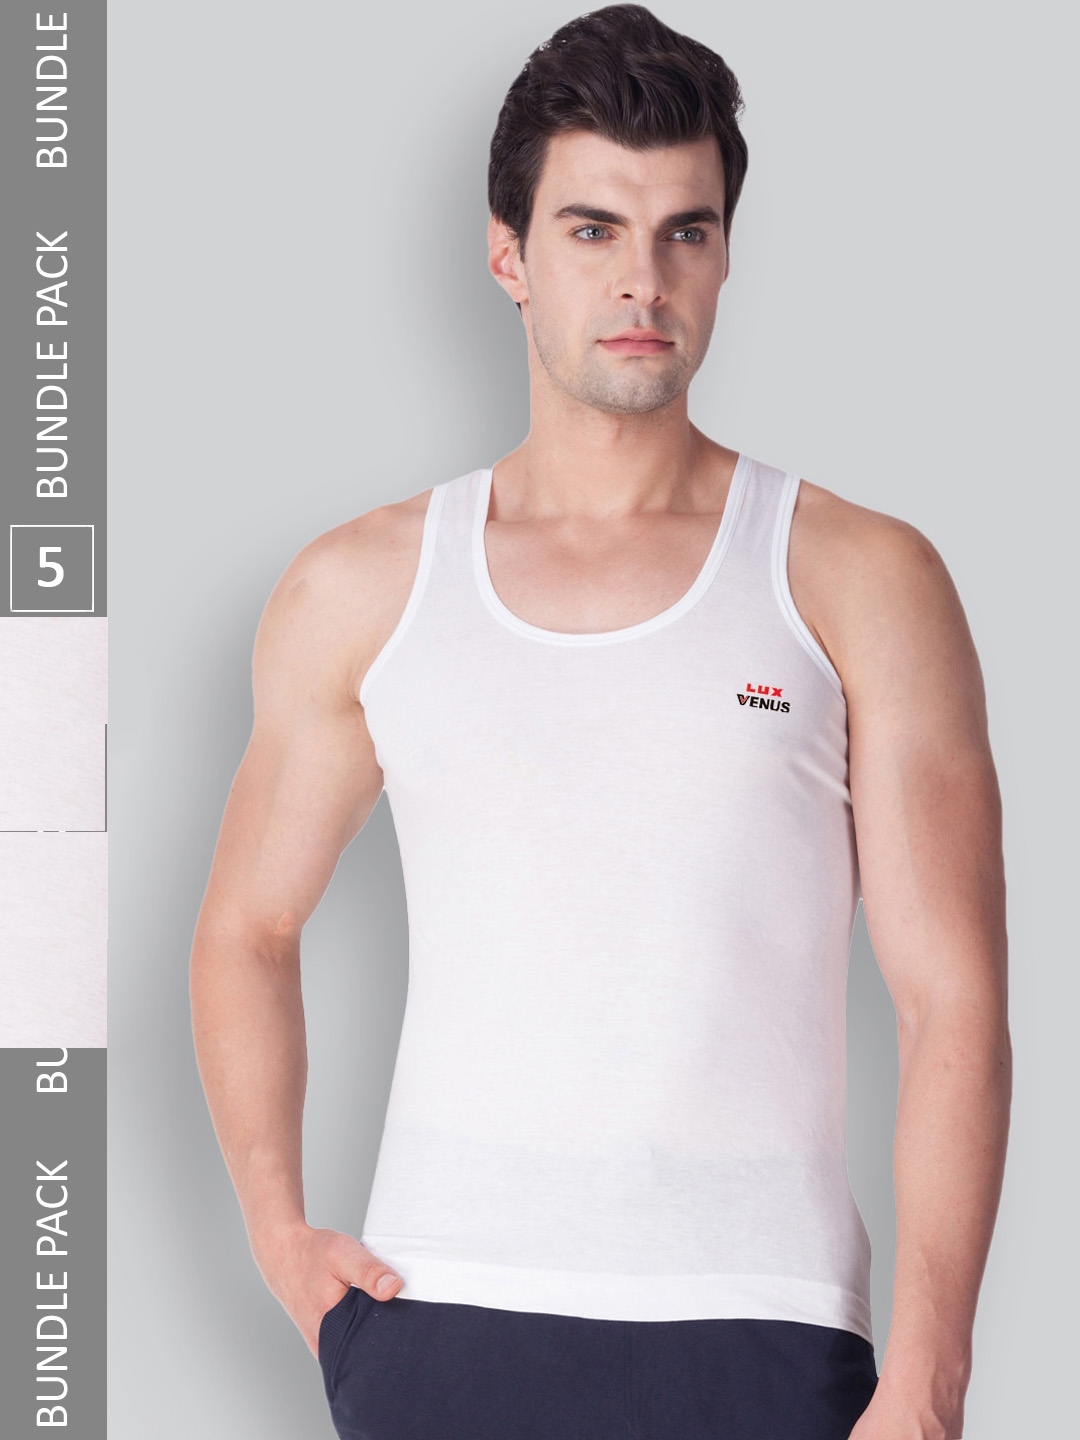 Shoppers boys - Combo pack200 rs only lux Venus underwear and lux  Cozi..Xylo gym vest